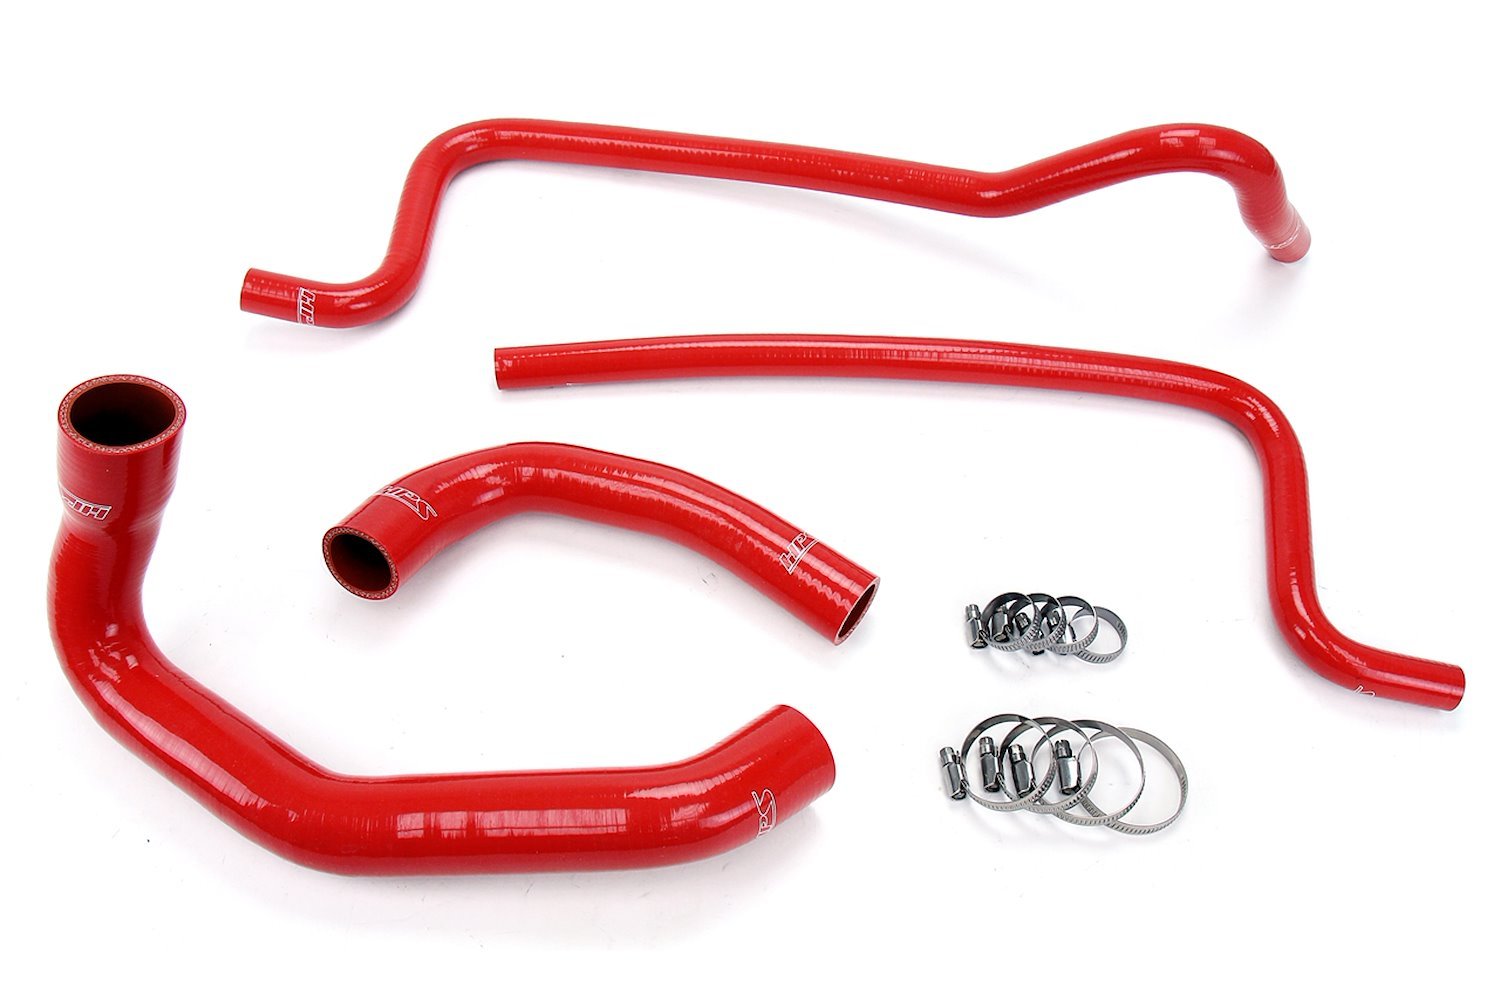 57-1292-RED Coolant Hose Kit, High-Temp 3-Ply Reinforced Silicone, Replace Rubber Radiator Heater Coolant Hoses